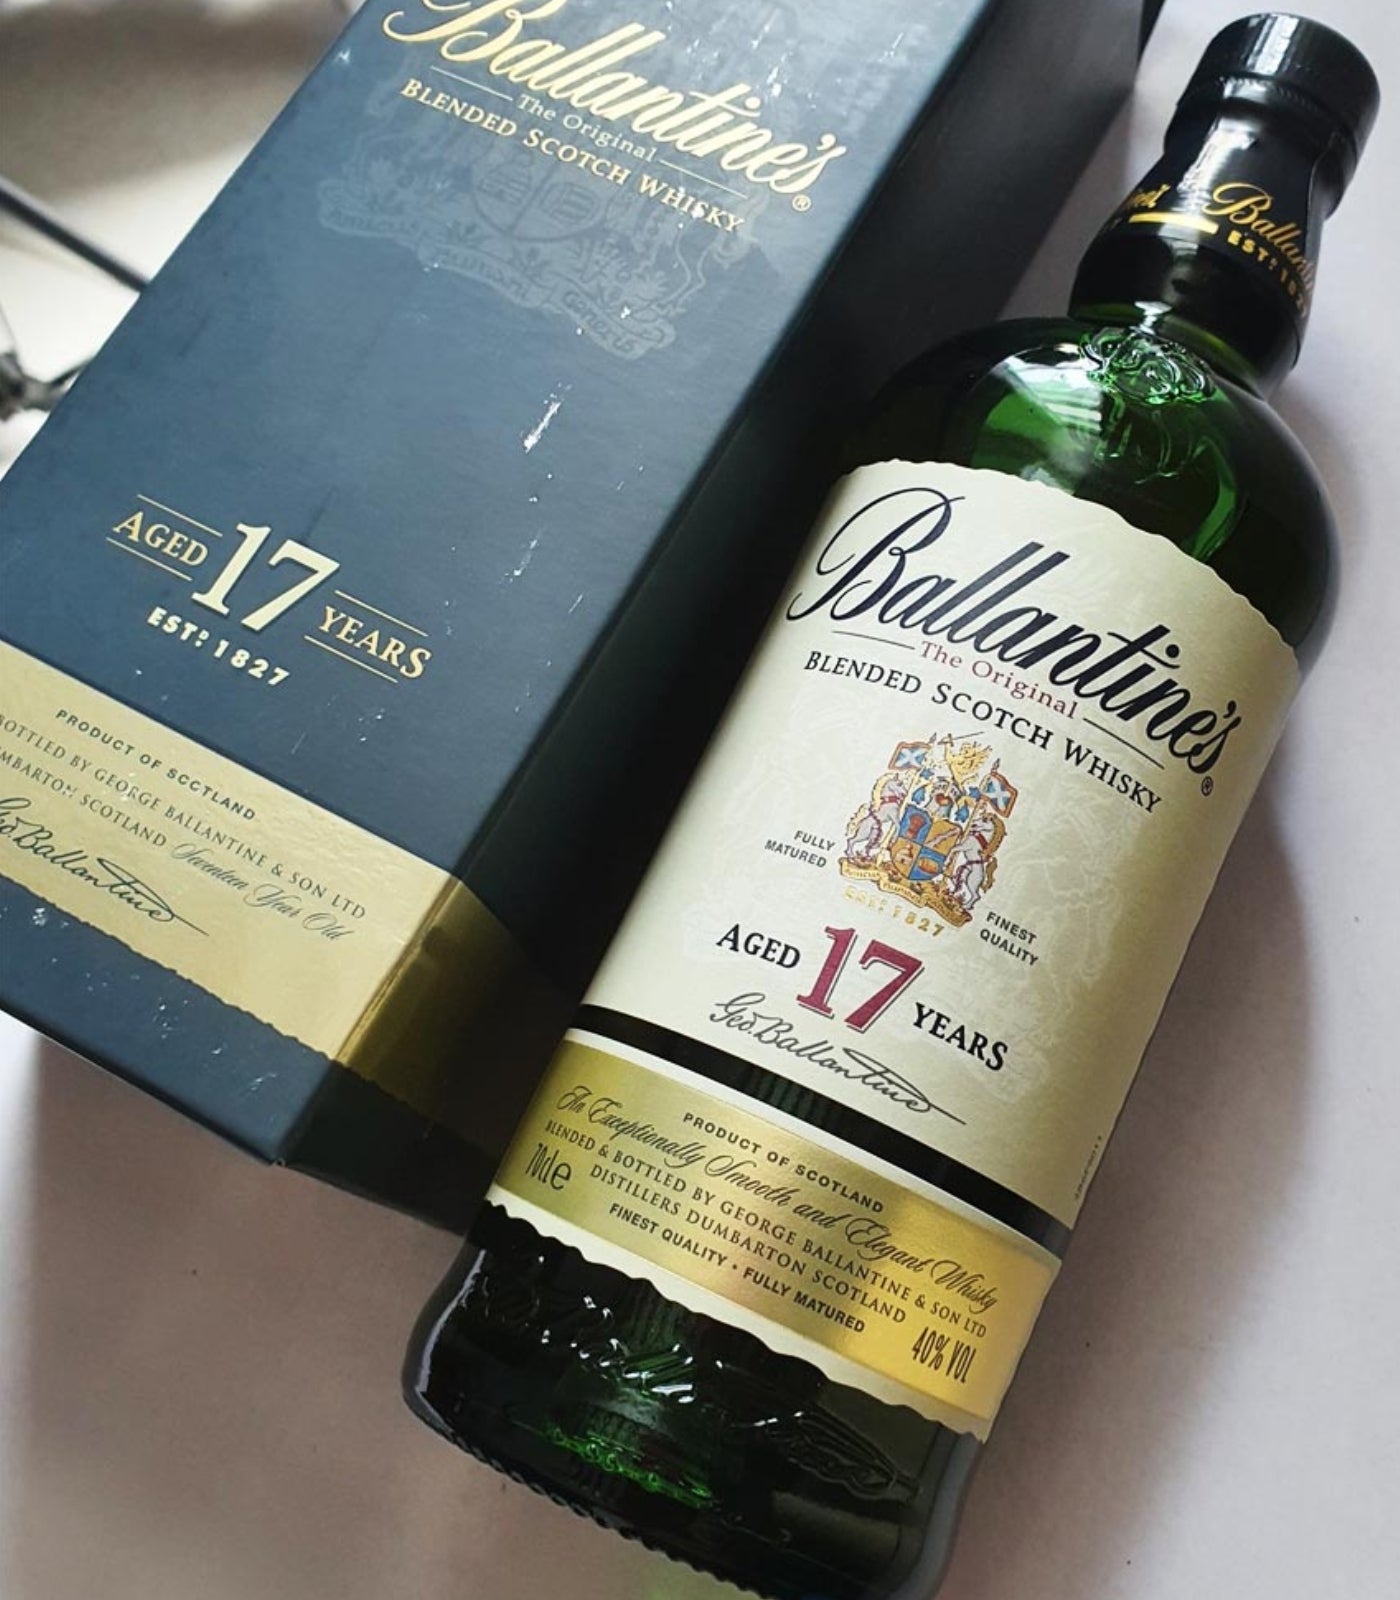 Ballantine's 17 Year Old Blended Scotch Whisky (70cl, 40%)